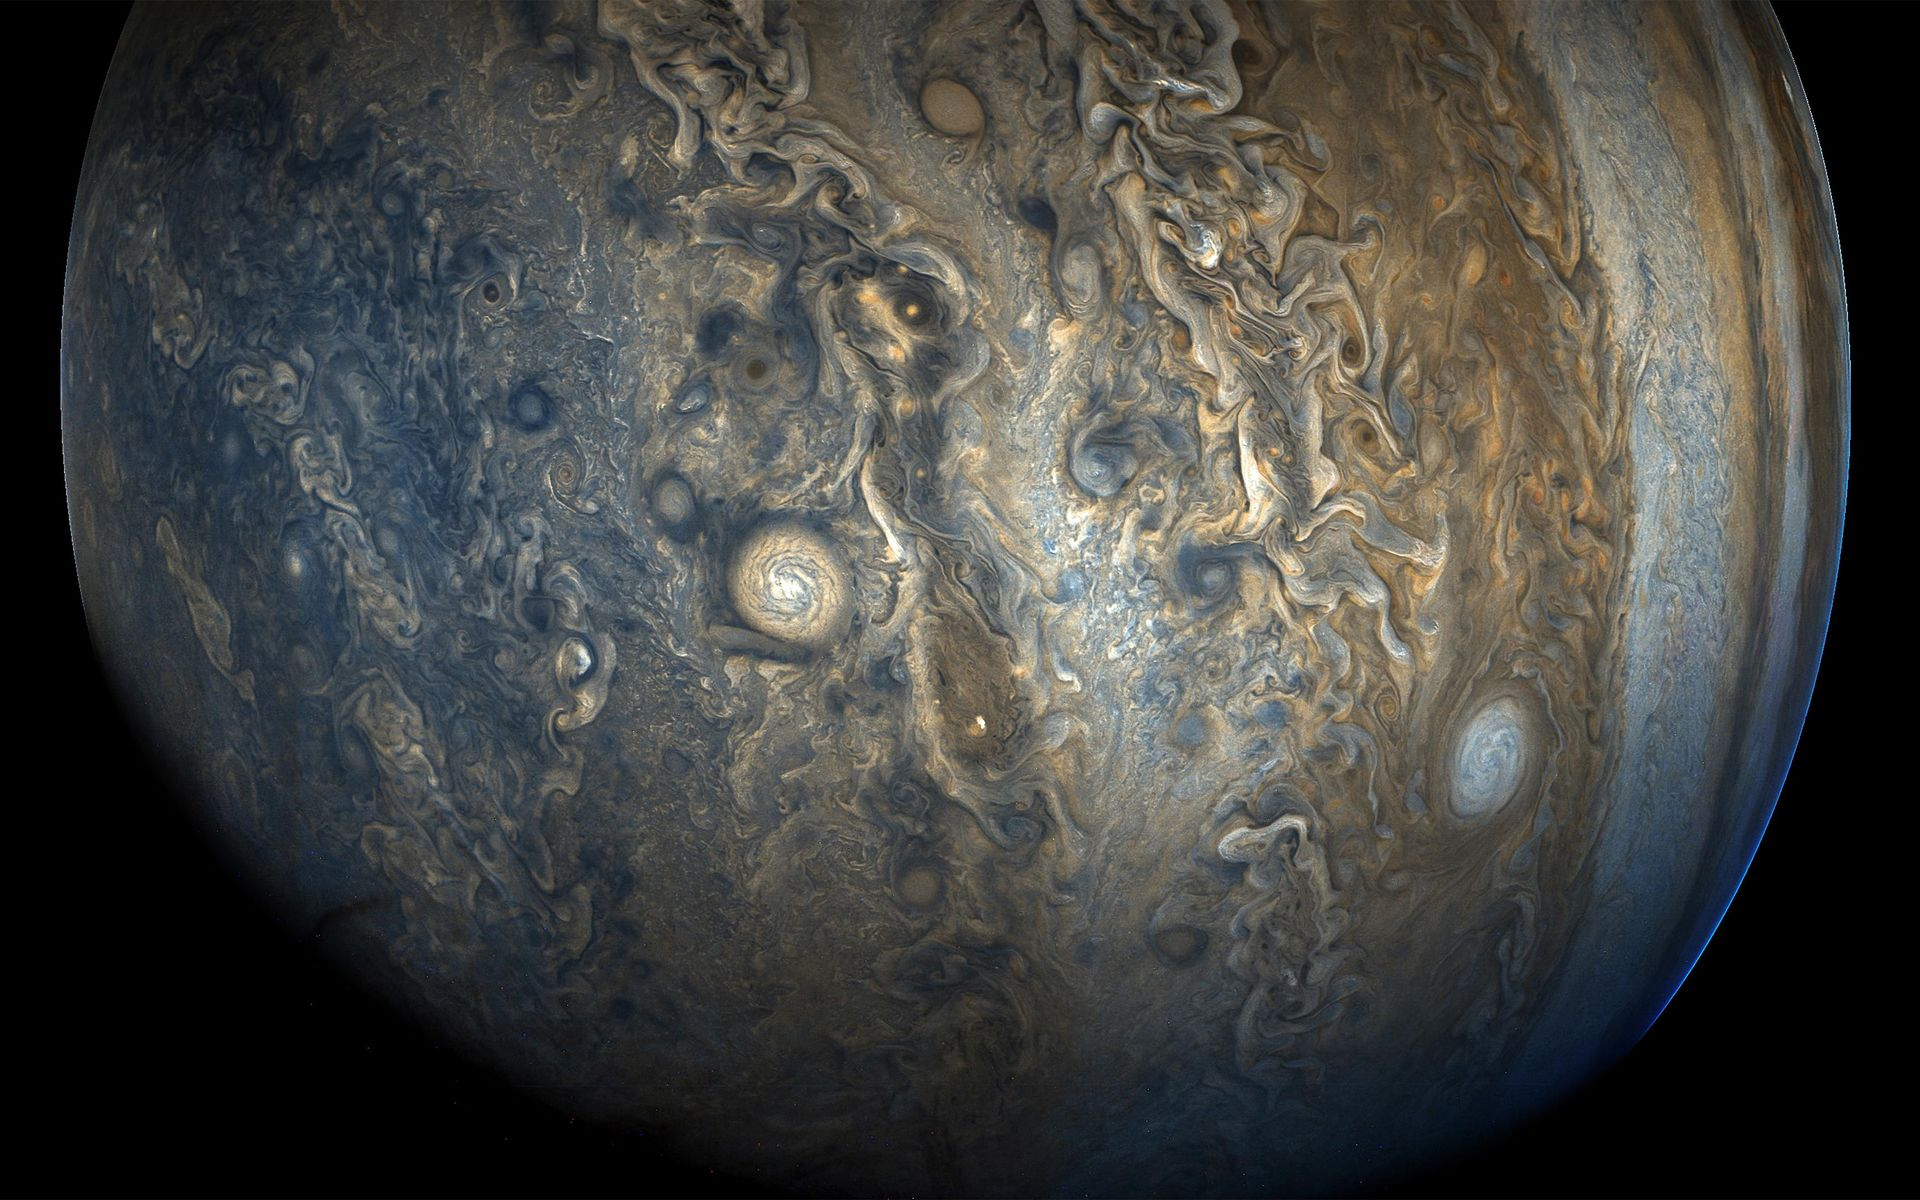 1920x1200 10 Things for Jan. 8: Images for Your Computer or Phone Wallpaper &acirc;&#128;&#147; NASA Solar System Explorati